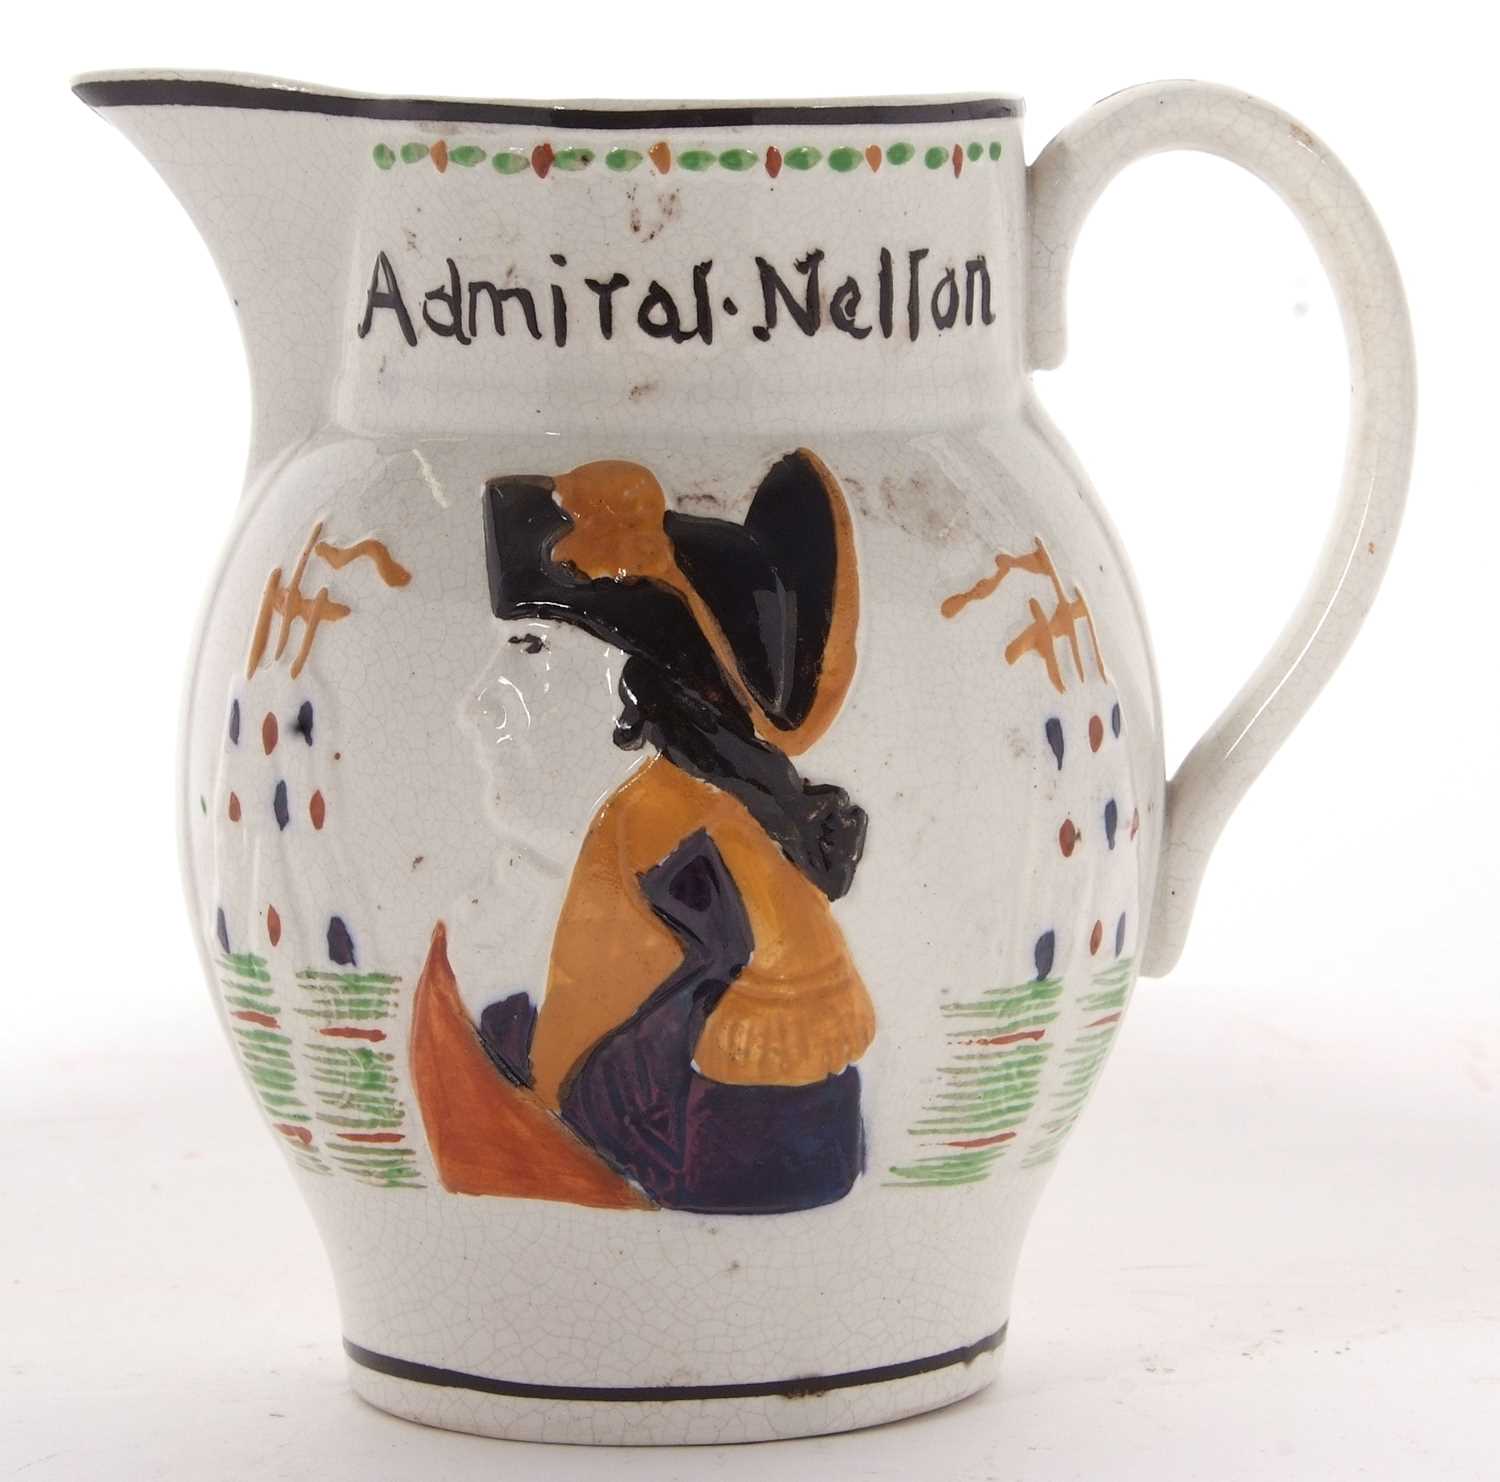 A Pratt Ware type jug modelled with Admiral Nelson in relief, the reverse with Captain Hardy, 15cm - Image 7 of 7